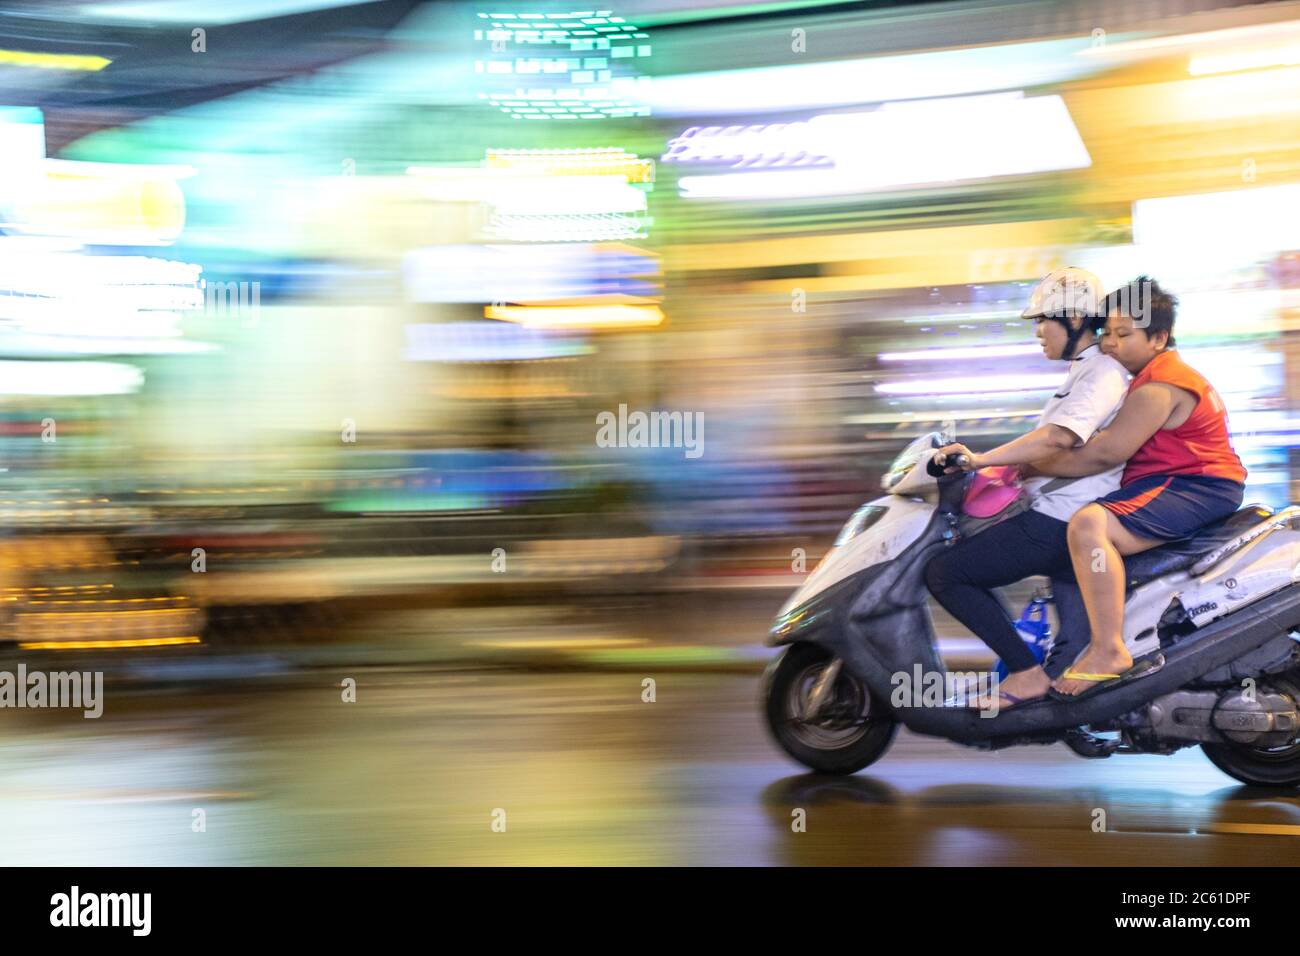 A speeding motorbike in an Asian city centre Stock Photo